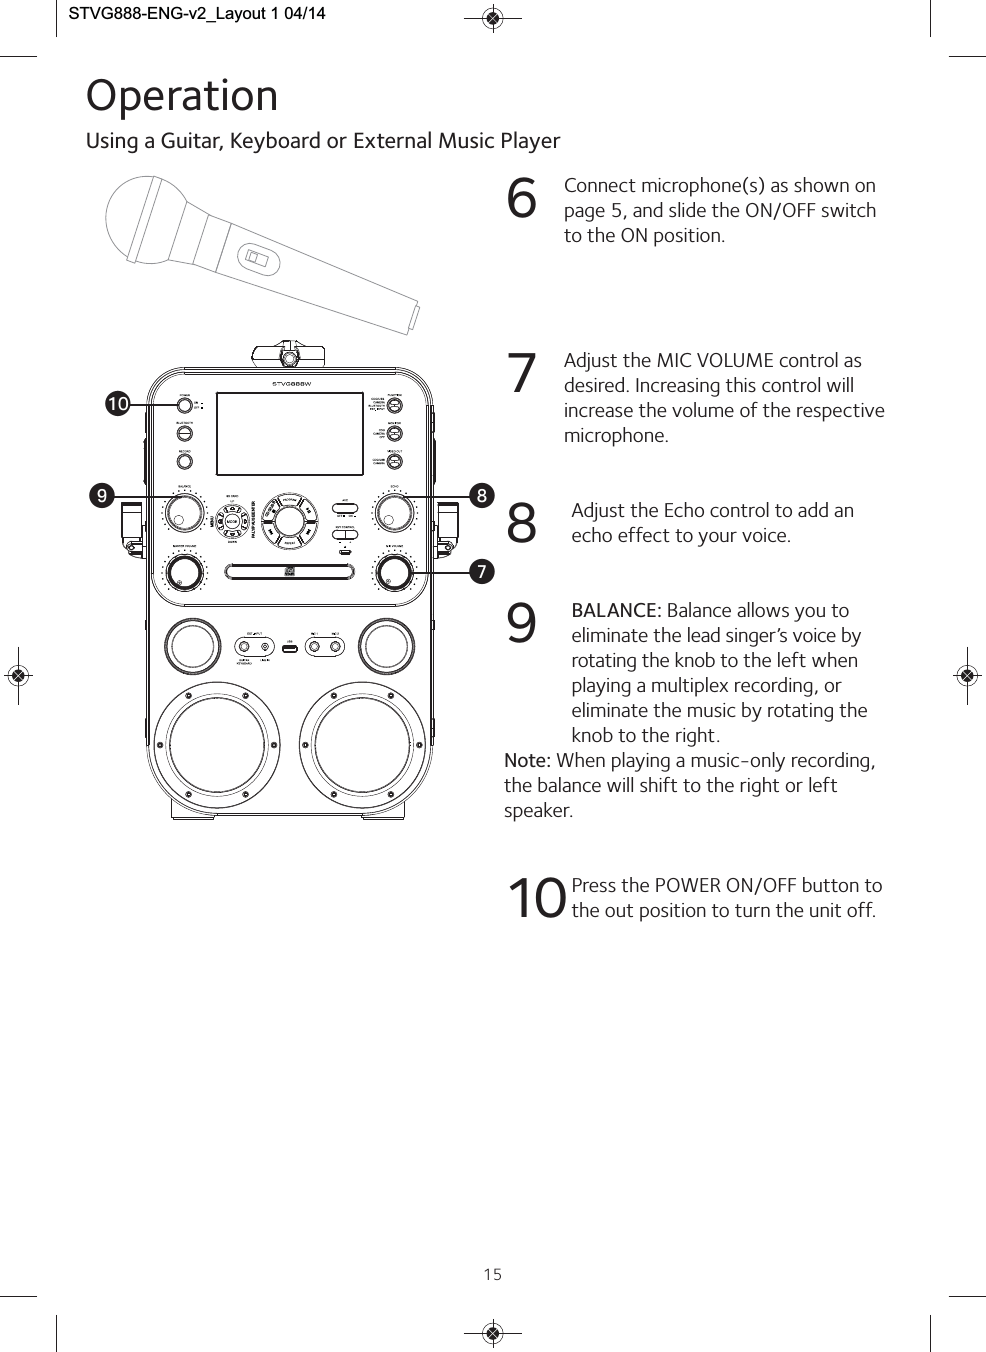 15Operation6Connect microphone(s) as shown onpage 5, and slide the ON/OFF switchto the ON position.7Adjust the MIC VOLUME control asdesired. Increasing this control willincrease the volume of the respectivemicrophone. 8Adjust the Echo control to add anecho effect to your voice.9BALANCE: Balance allows you toeliminate the lead singer’s voice byrotating the knob to the left whenplaying a multiplex recording, oreliminate the music by rotating theknob to the right.Note: When playing a music-only recording,the balance will shift to the right or leftspeaker.10 Press the POWER ON/OFF button tothe out position to turn the unit off.Using a Guitar, Keyboard or External Music PlayeratVWXMENUCDG/USBPALY/PAUSE/ENTERSTVG888-ENG-v2_Layout 1 04/14  